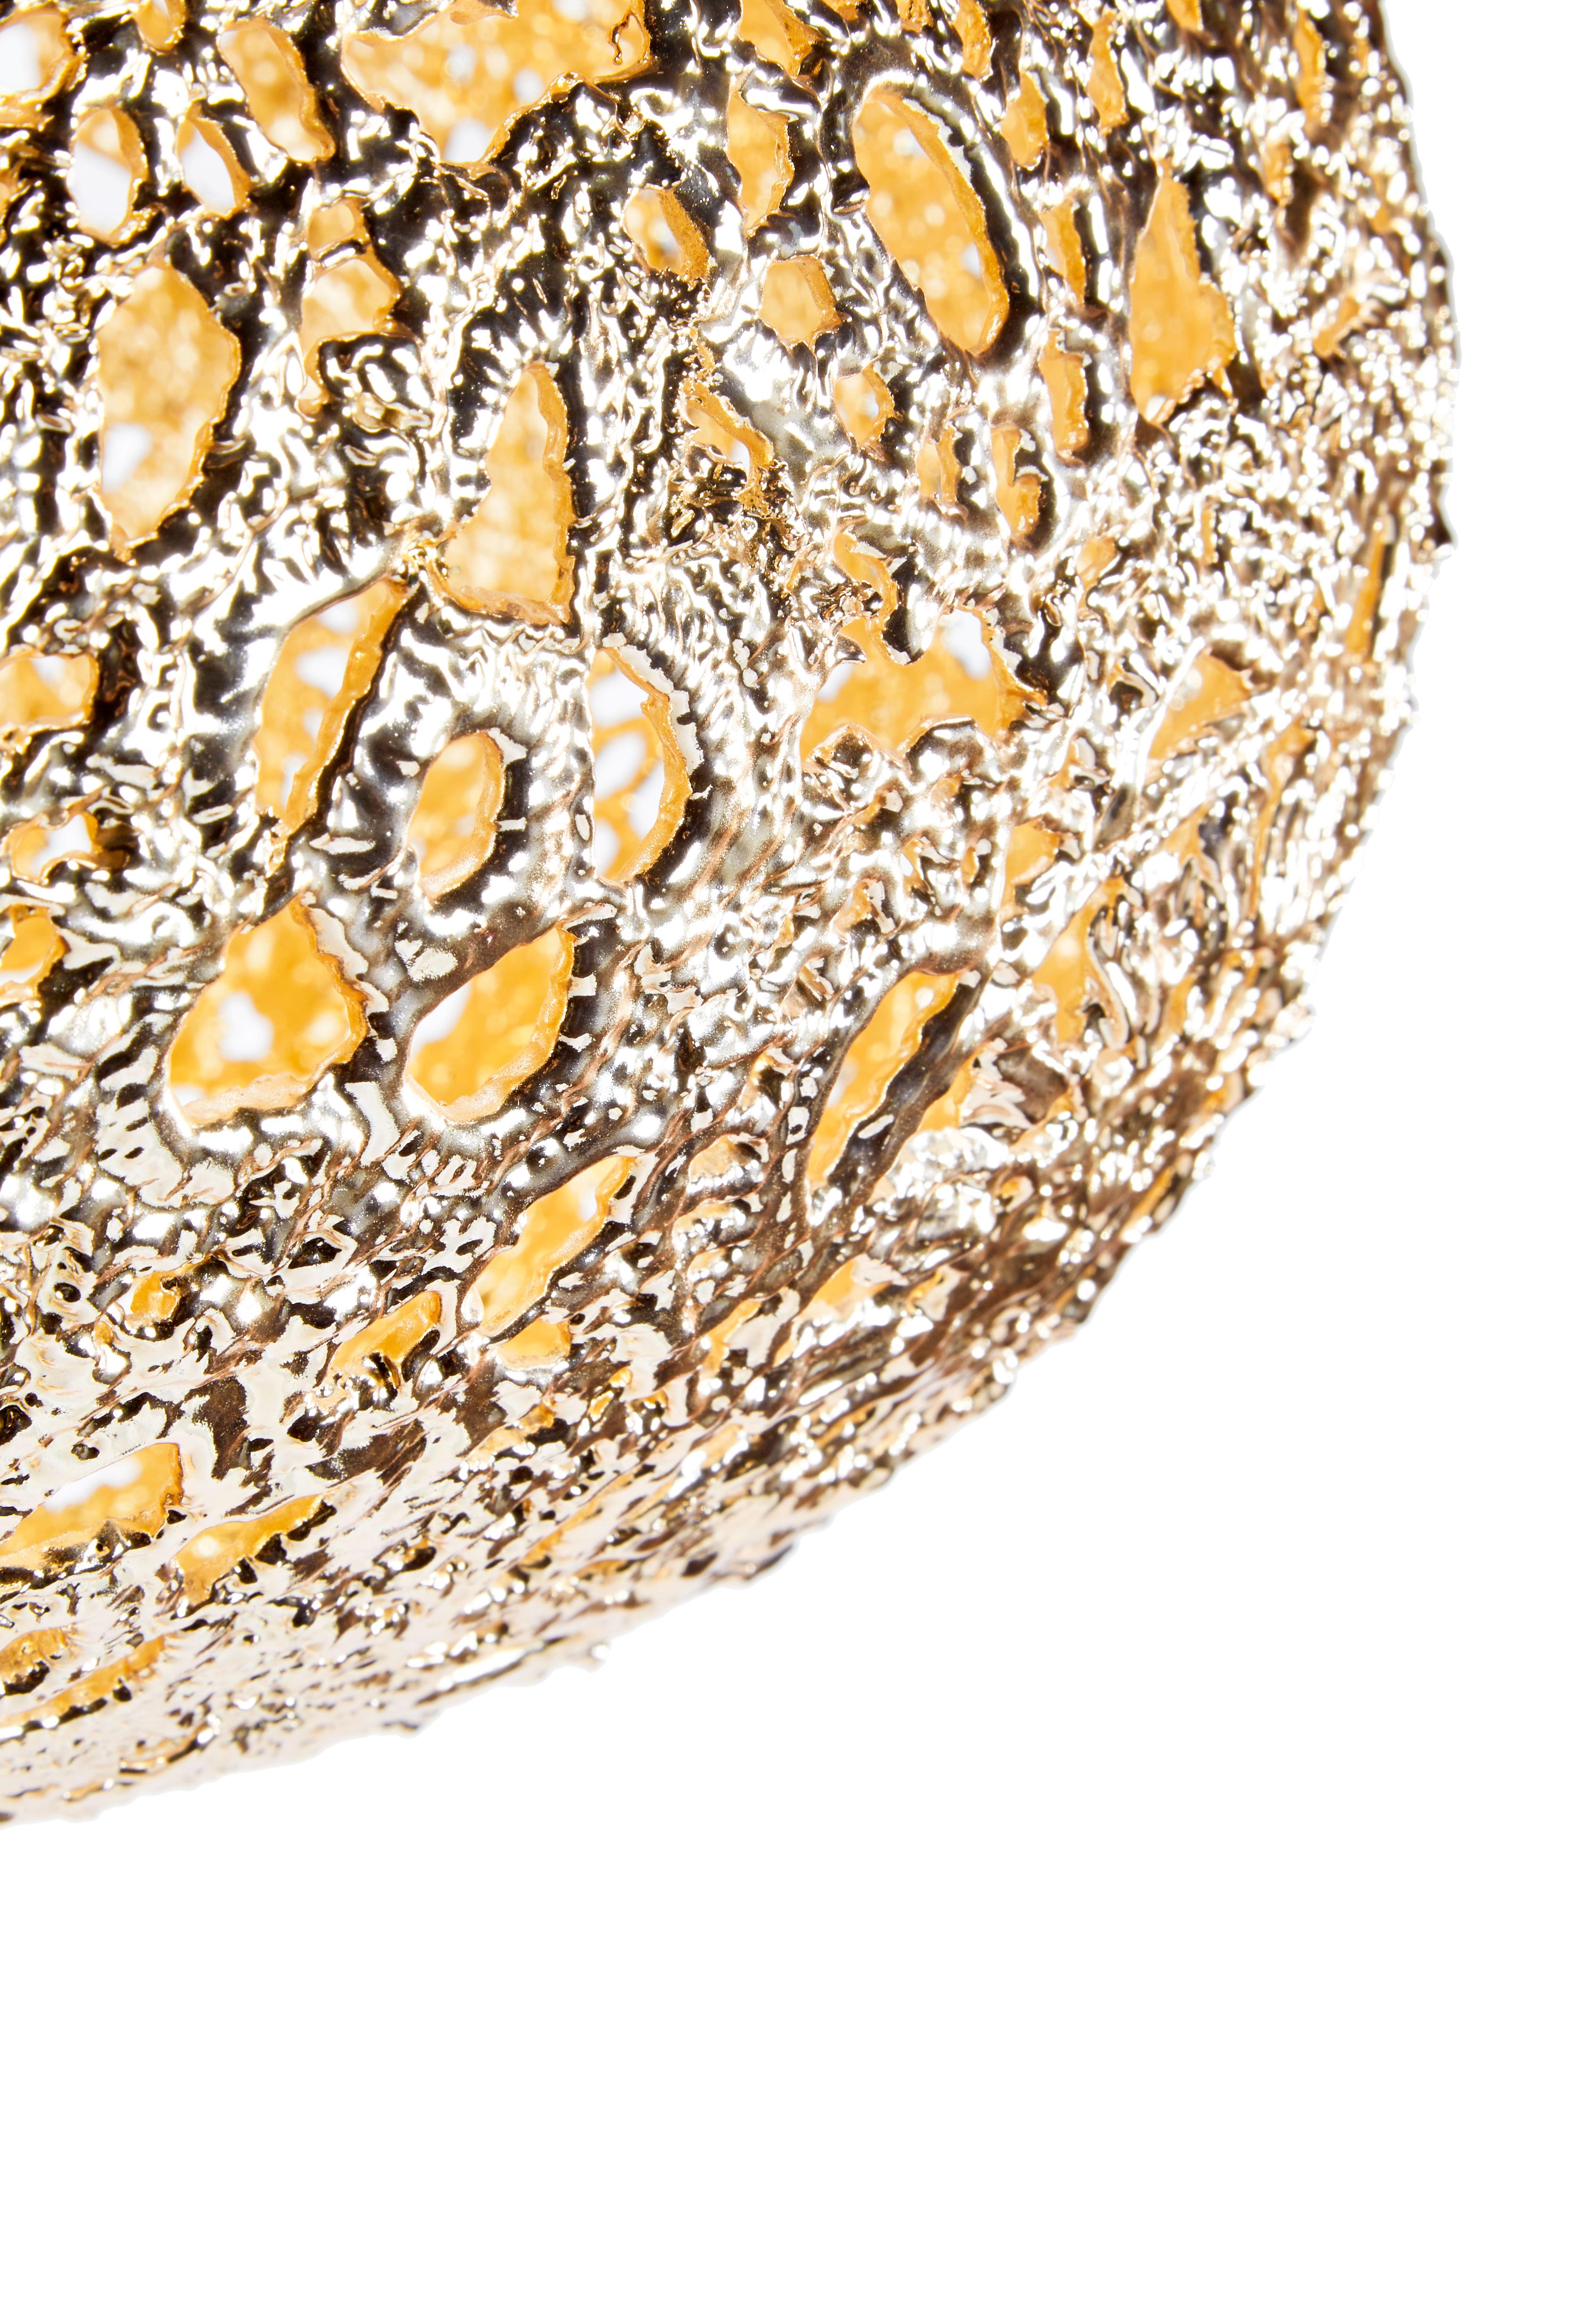 Gold Blossom, crocheted lamp, year of design 2010, edition #2/5

Gold Blossom is a limited edition of 5pcs and part of the Personal Editions Collection. Within this exclusive collection, Marcel invites happenstance and fortuitous collisions of